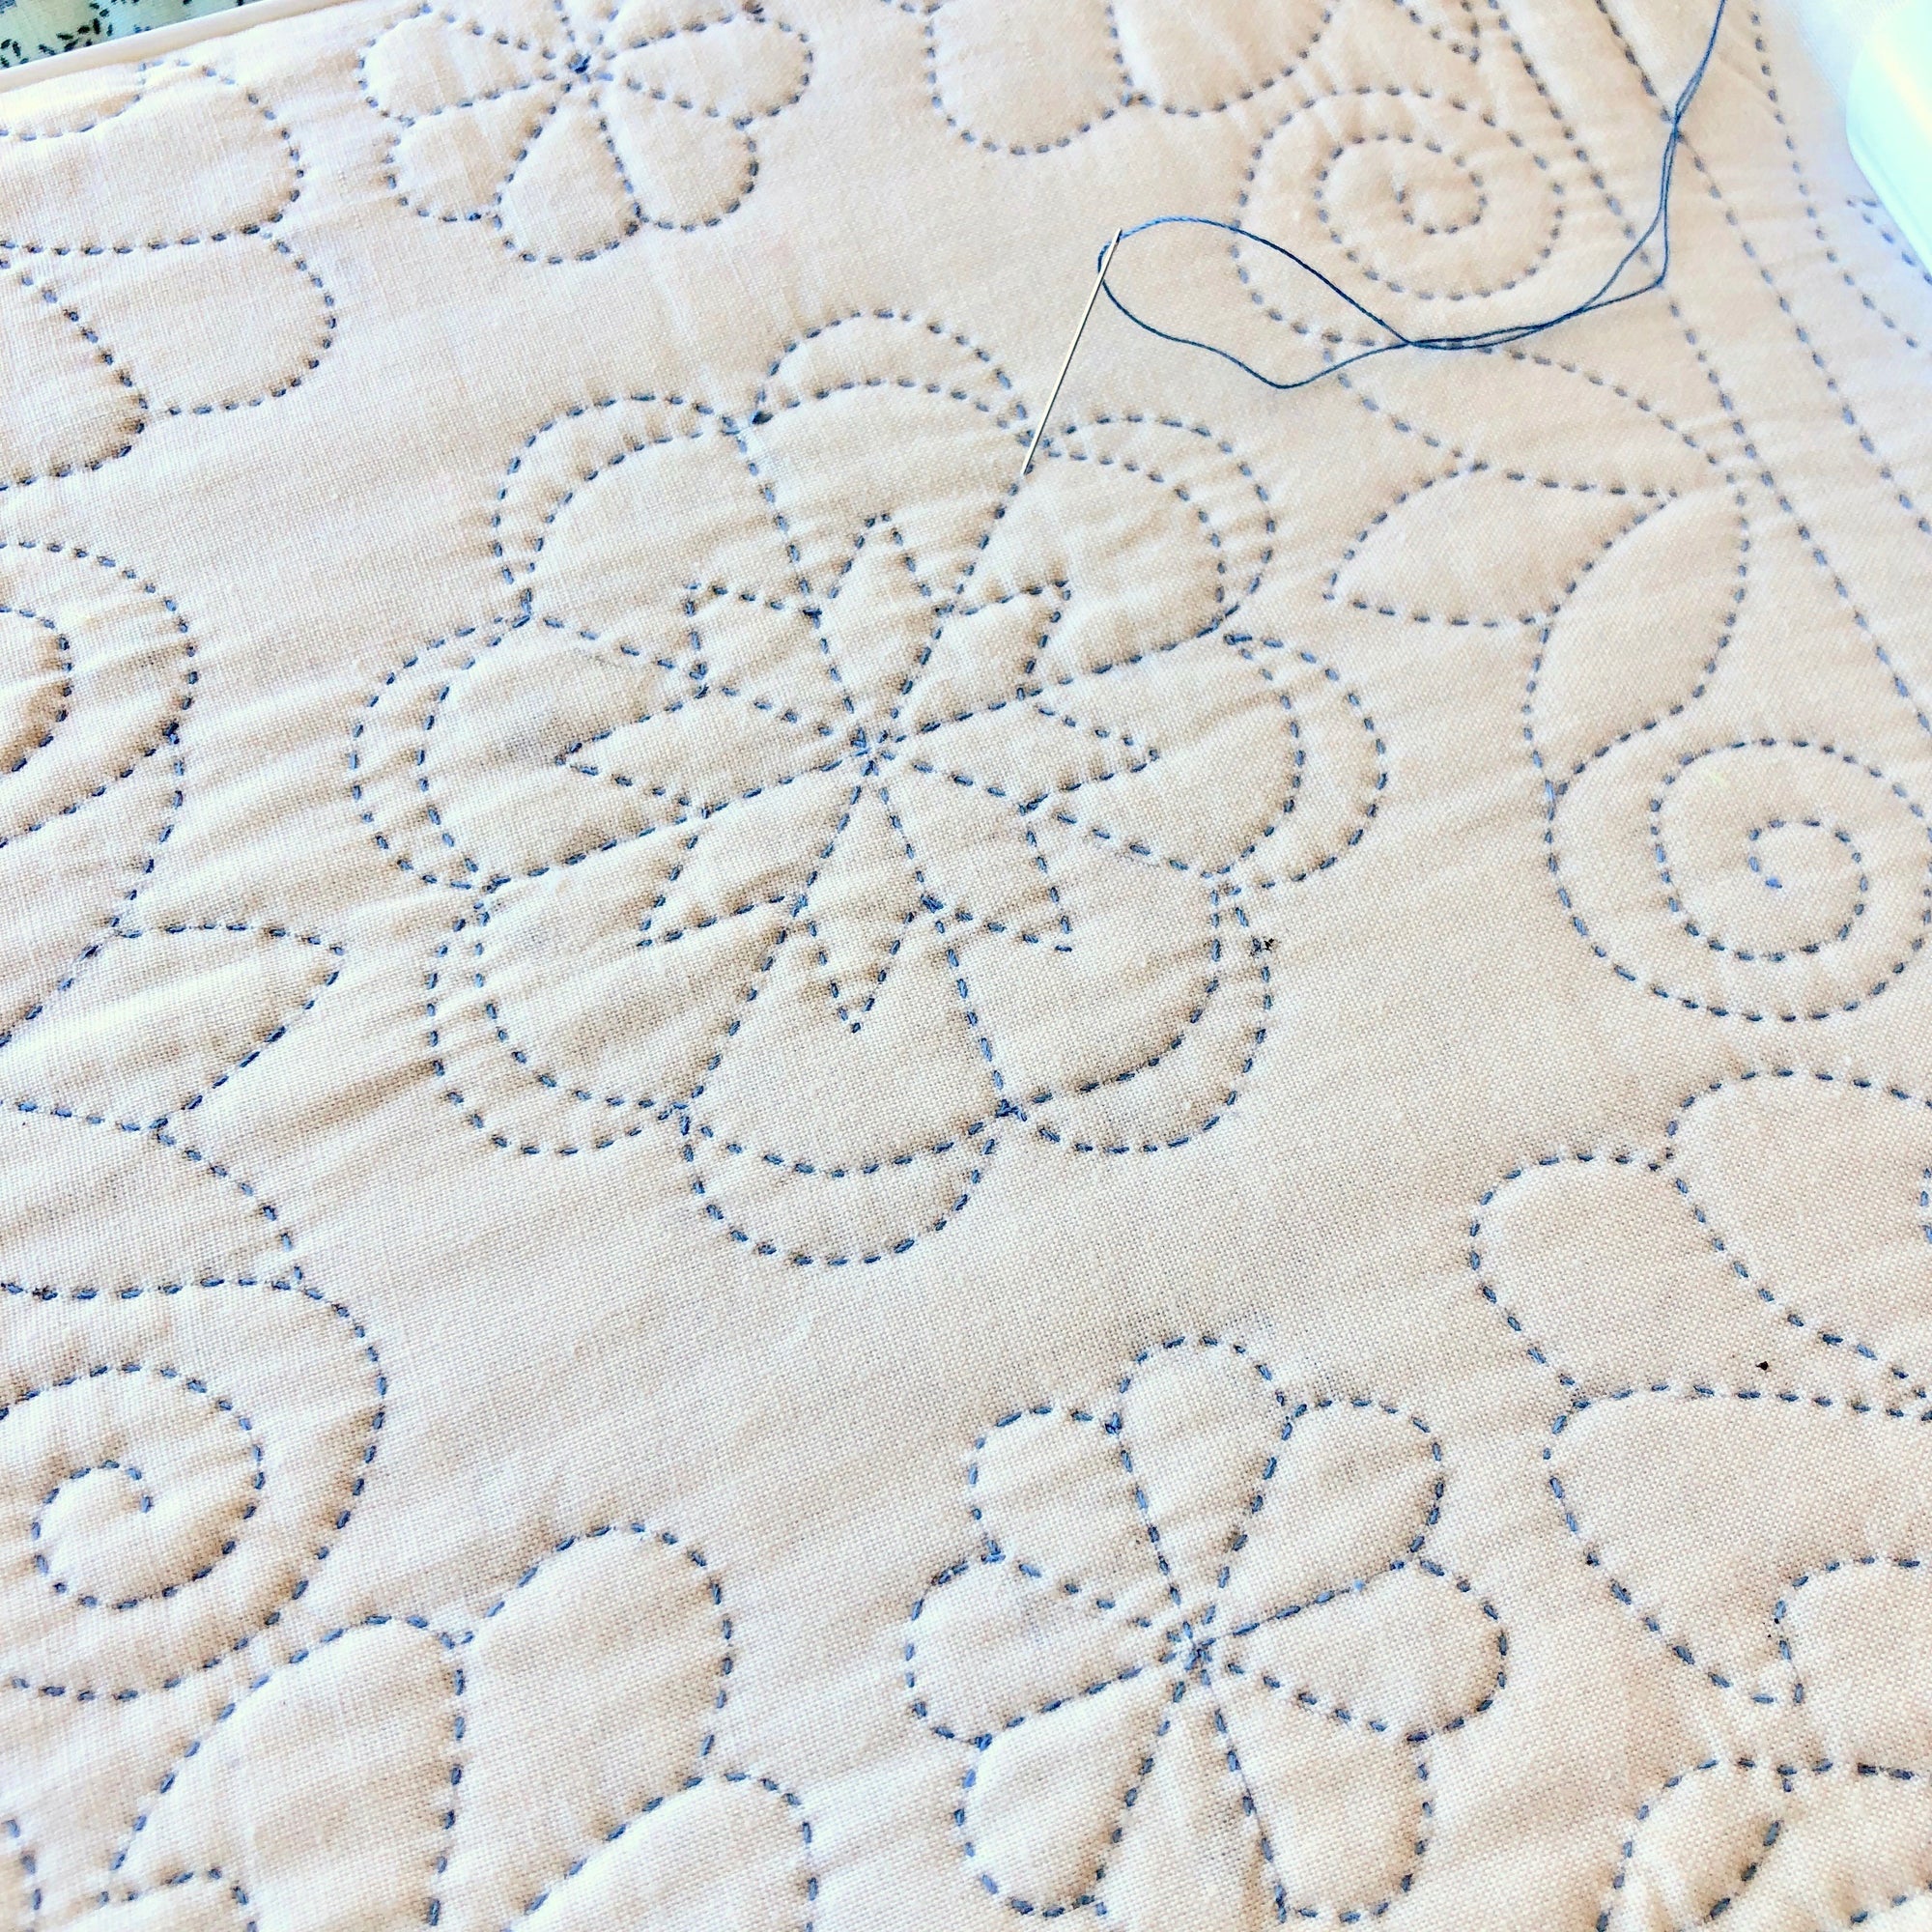 The Hand Quilting Stitch 3 Part Series - begins March 13